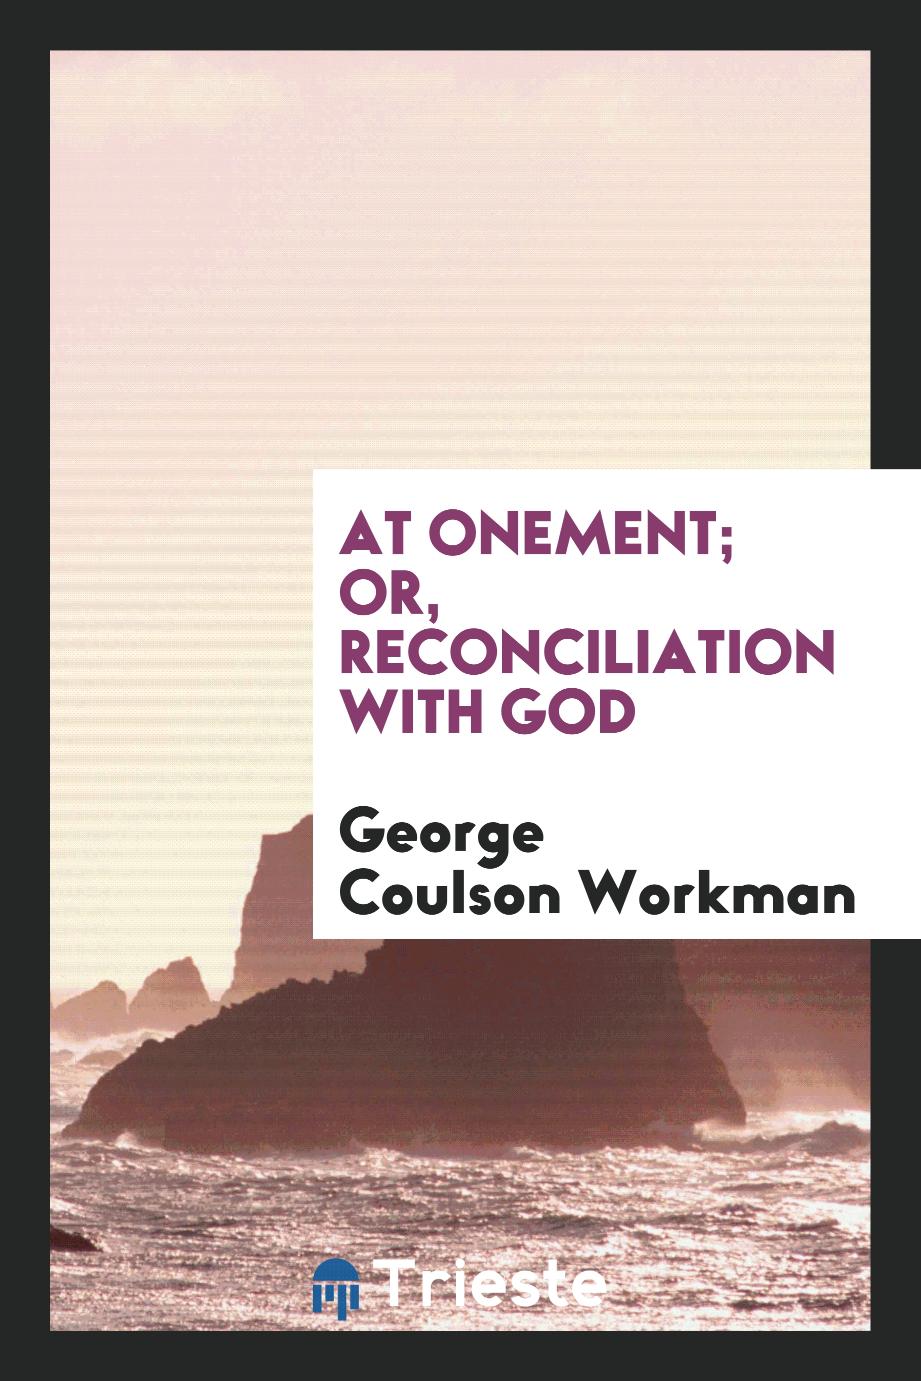 At Onement; or, Reconciliation with God